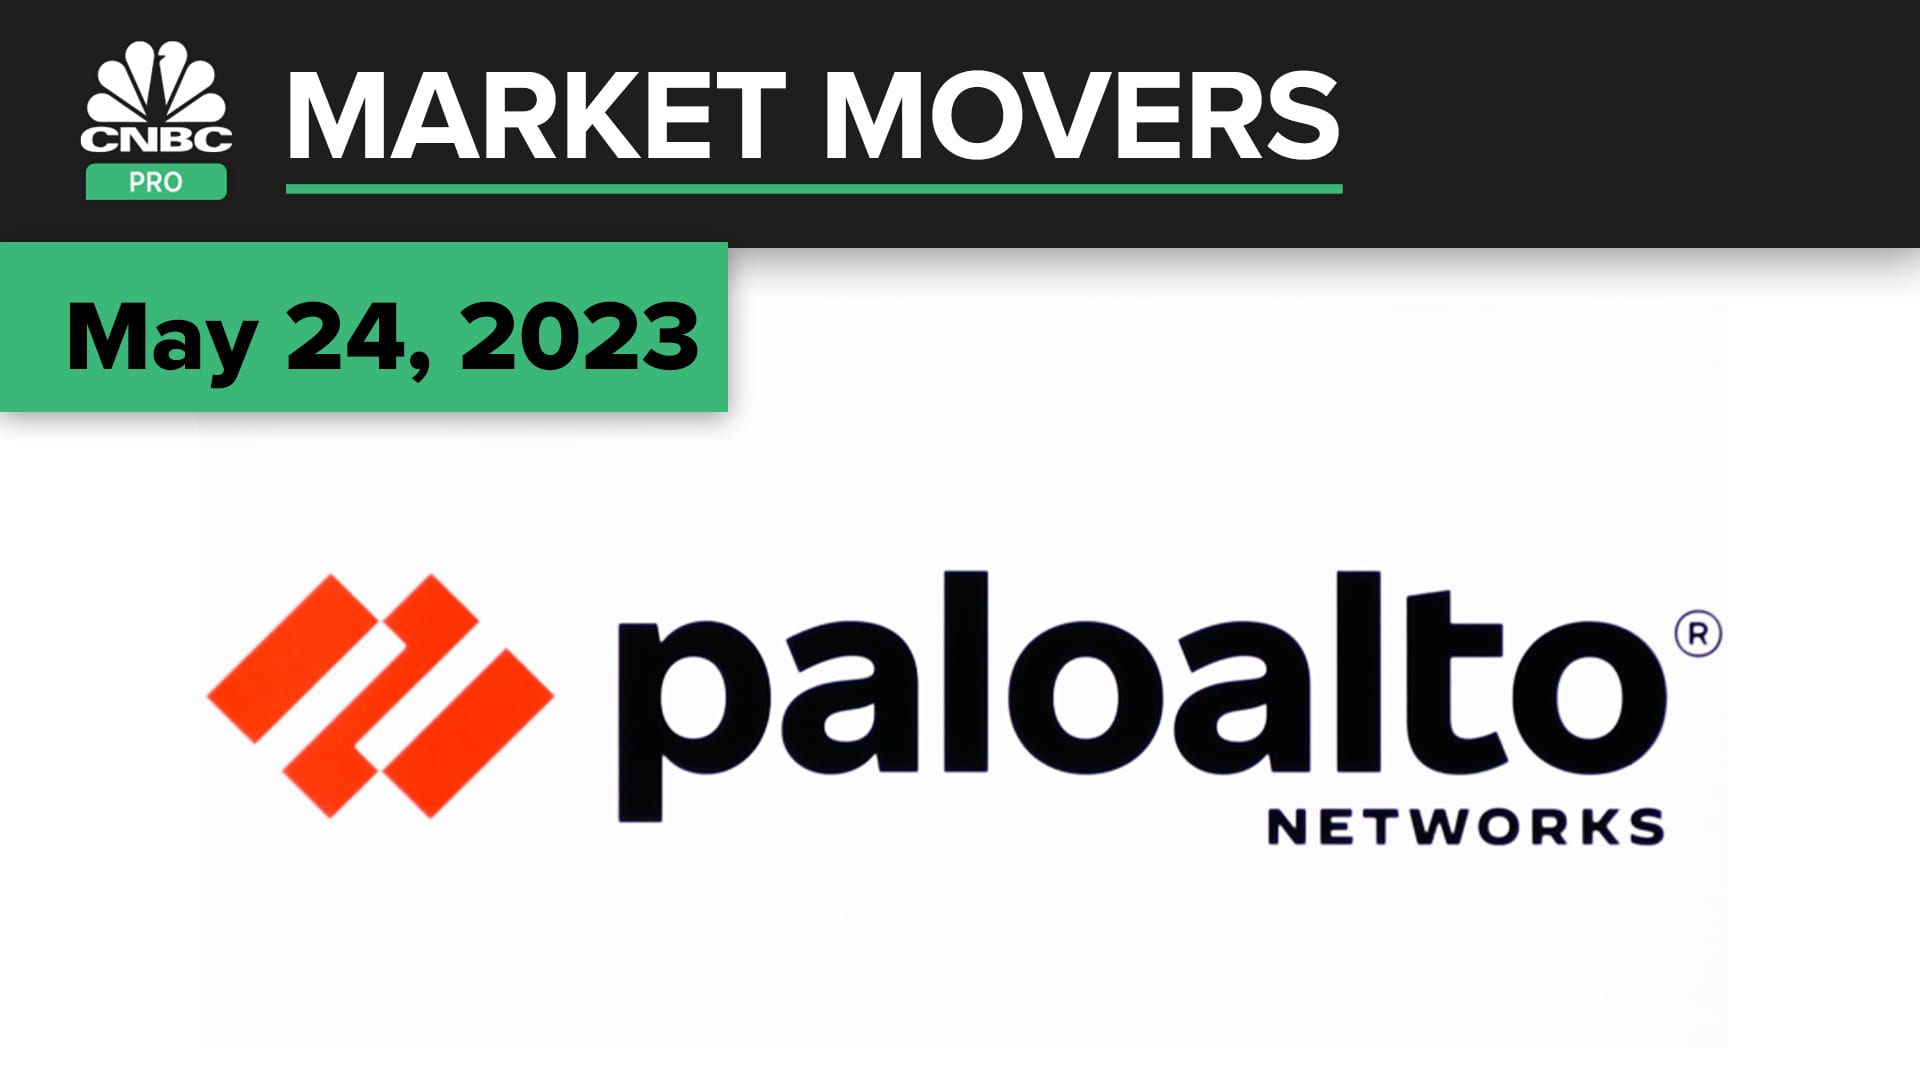 Palo Alto Networks shares pop on earnings and guidance. Here's what the experts have to say